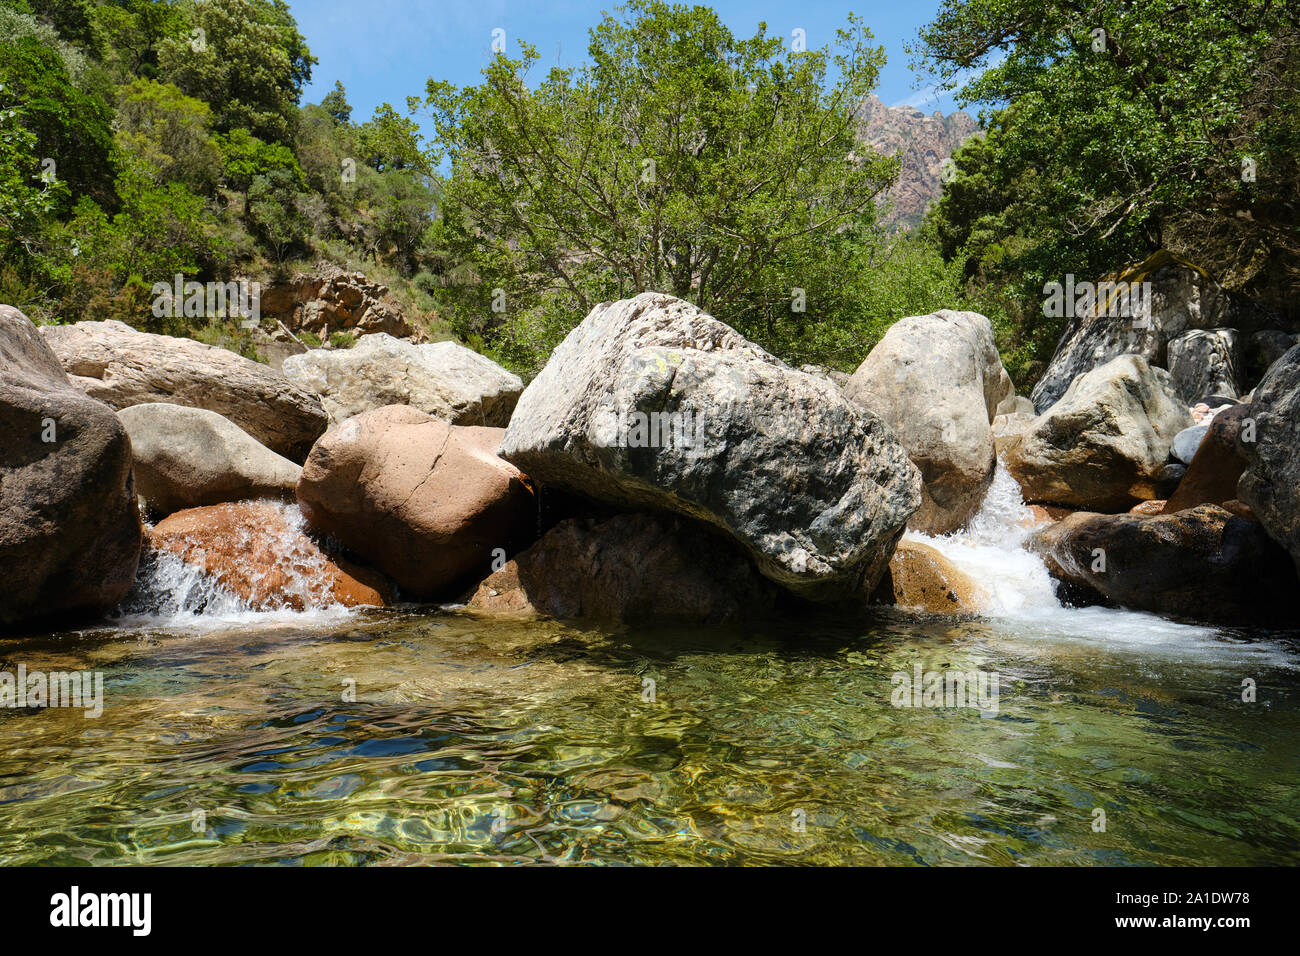 The Lonca stream and rock pool in the Spelunca Gorge / Gorges de Spelunca in Corse-du-Sud Ota Corsica France - natural swimming pool. Stock Photo